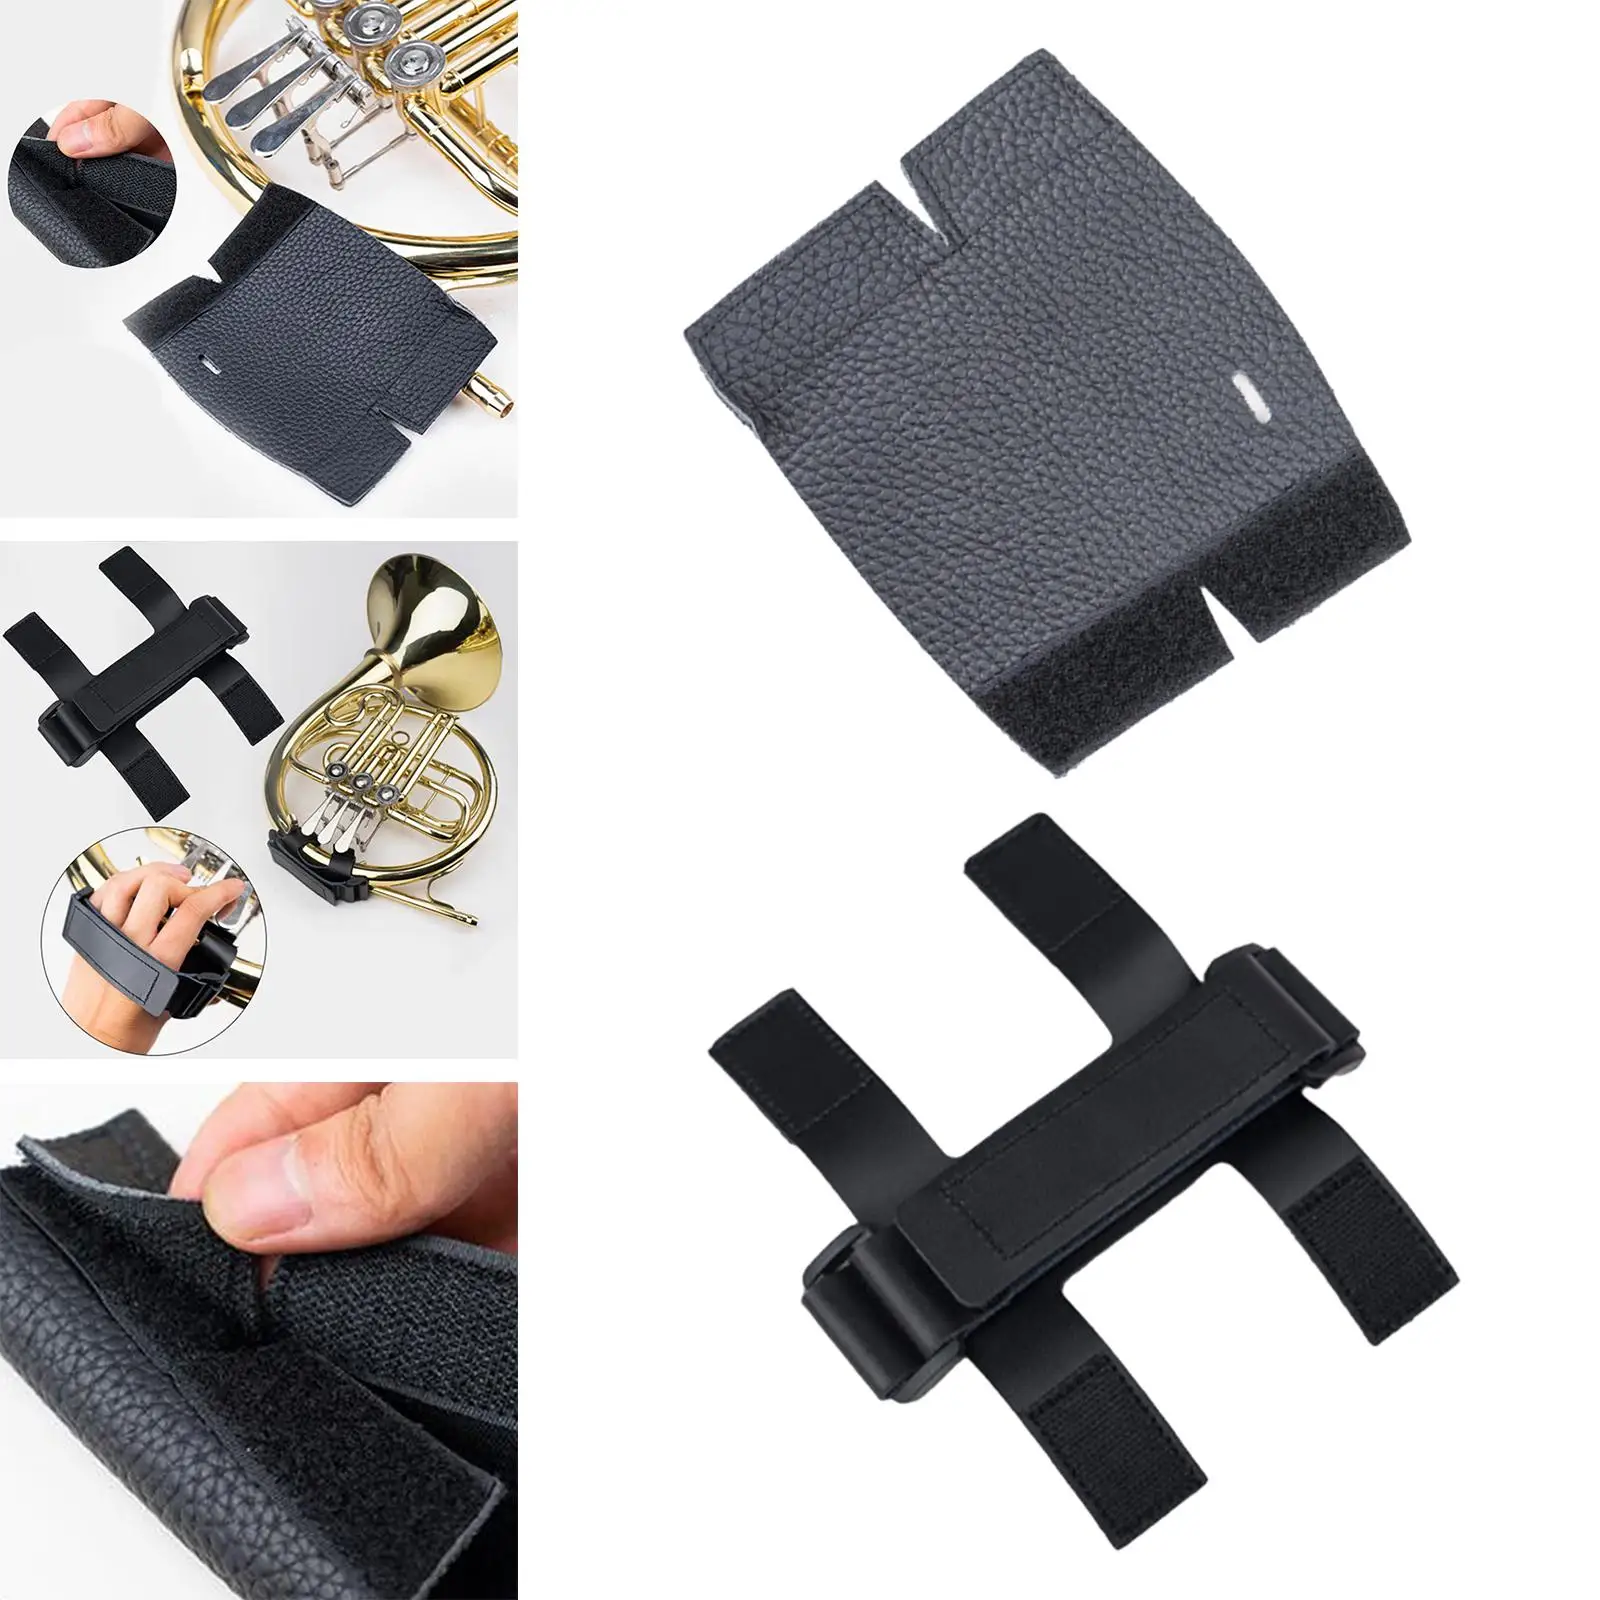 French Horn Hand Guard Non Slip Adjustable Wear Resistant Portable PU Leather for Performance Exercise Tour Practice Stage